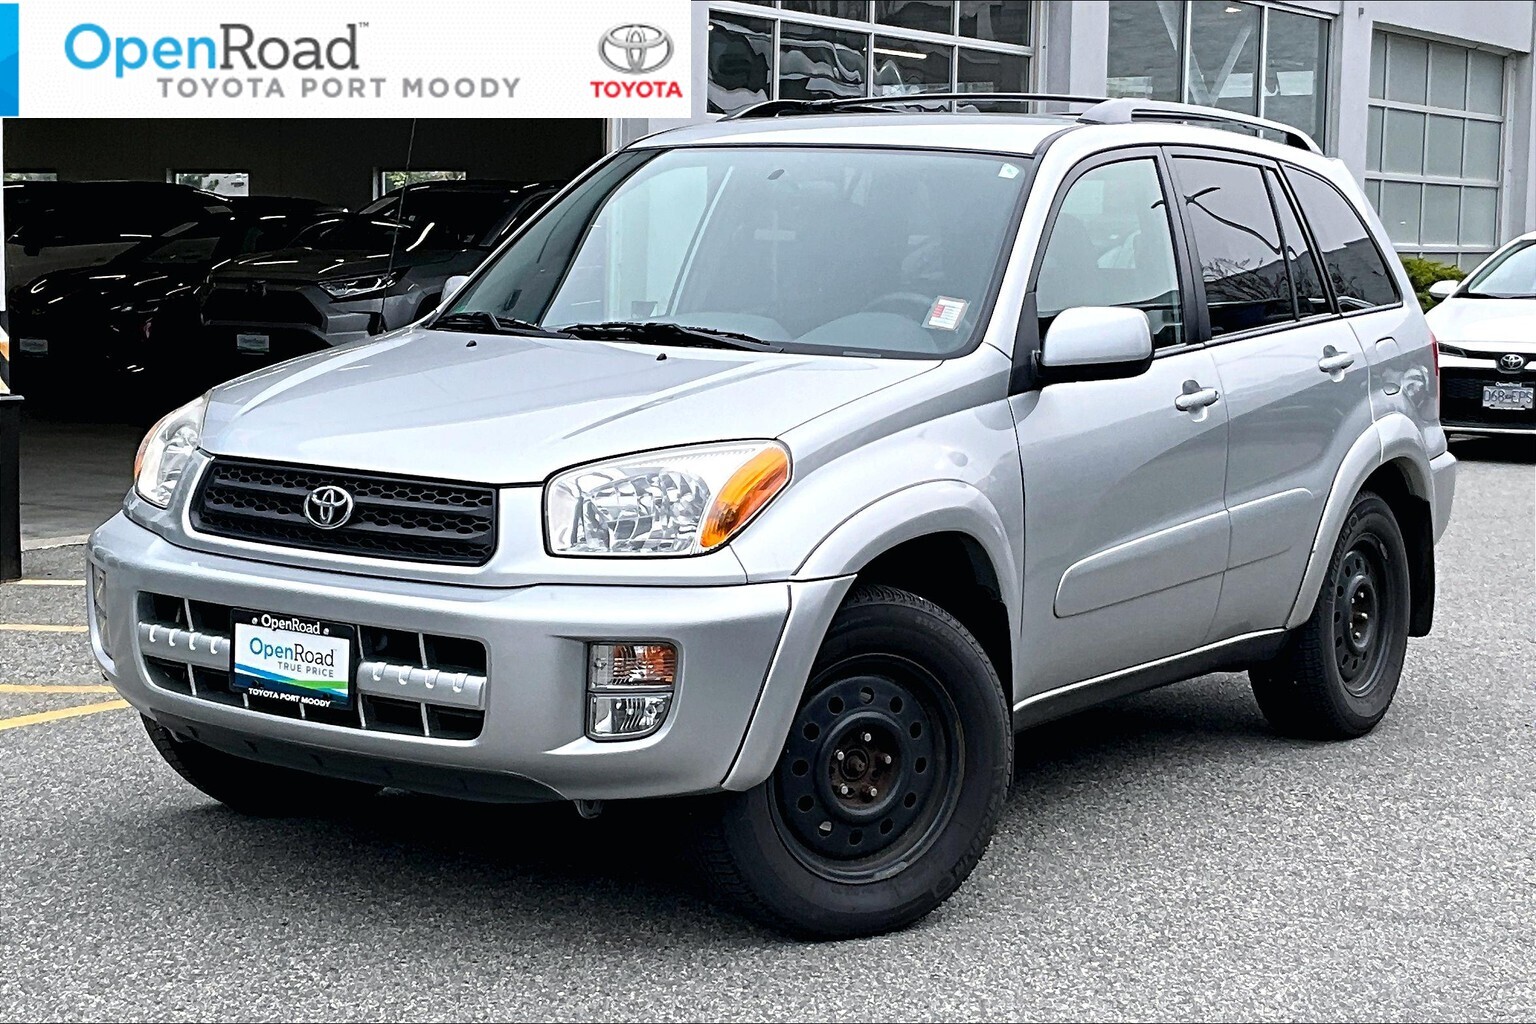 2002 Toyota RAV4 4-door 4WD 4A |OpenRoad True Price |Local |One Own